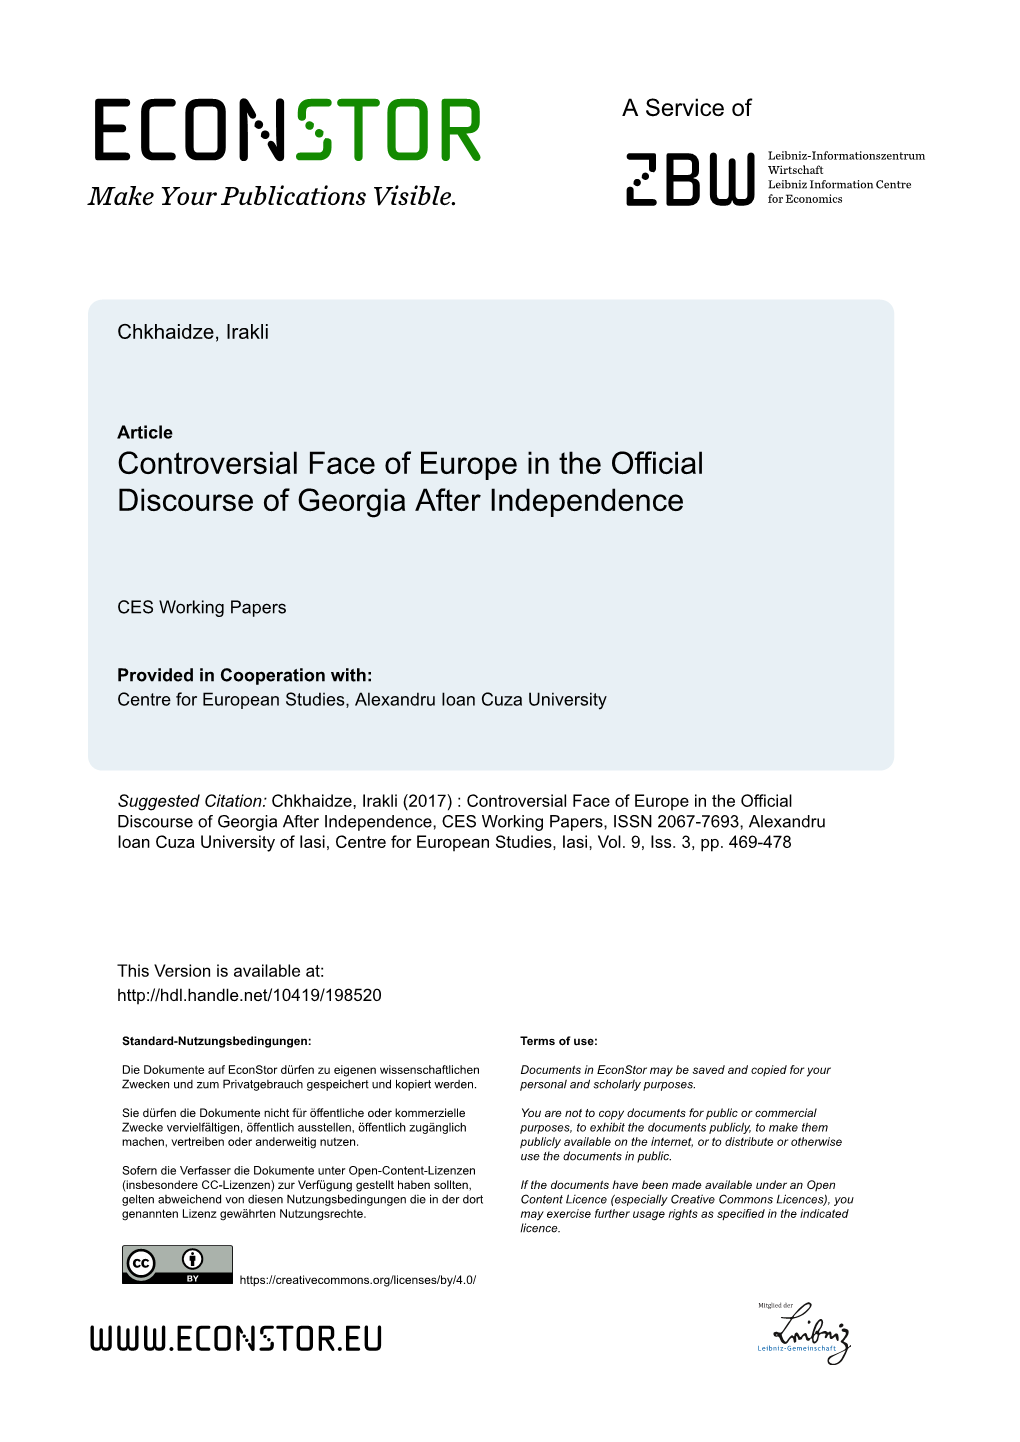 Controversial Face of Europe in the Official Discourse of Georgia After Independence